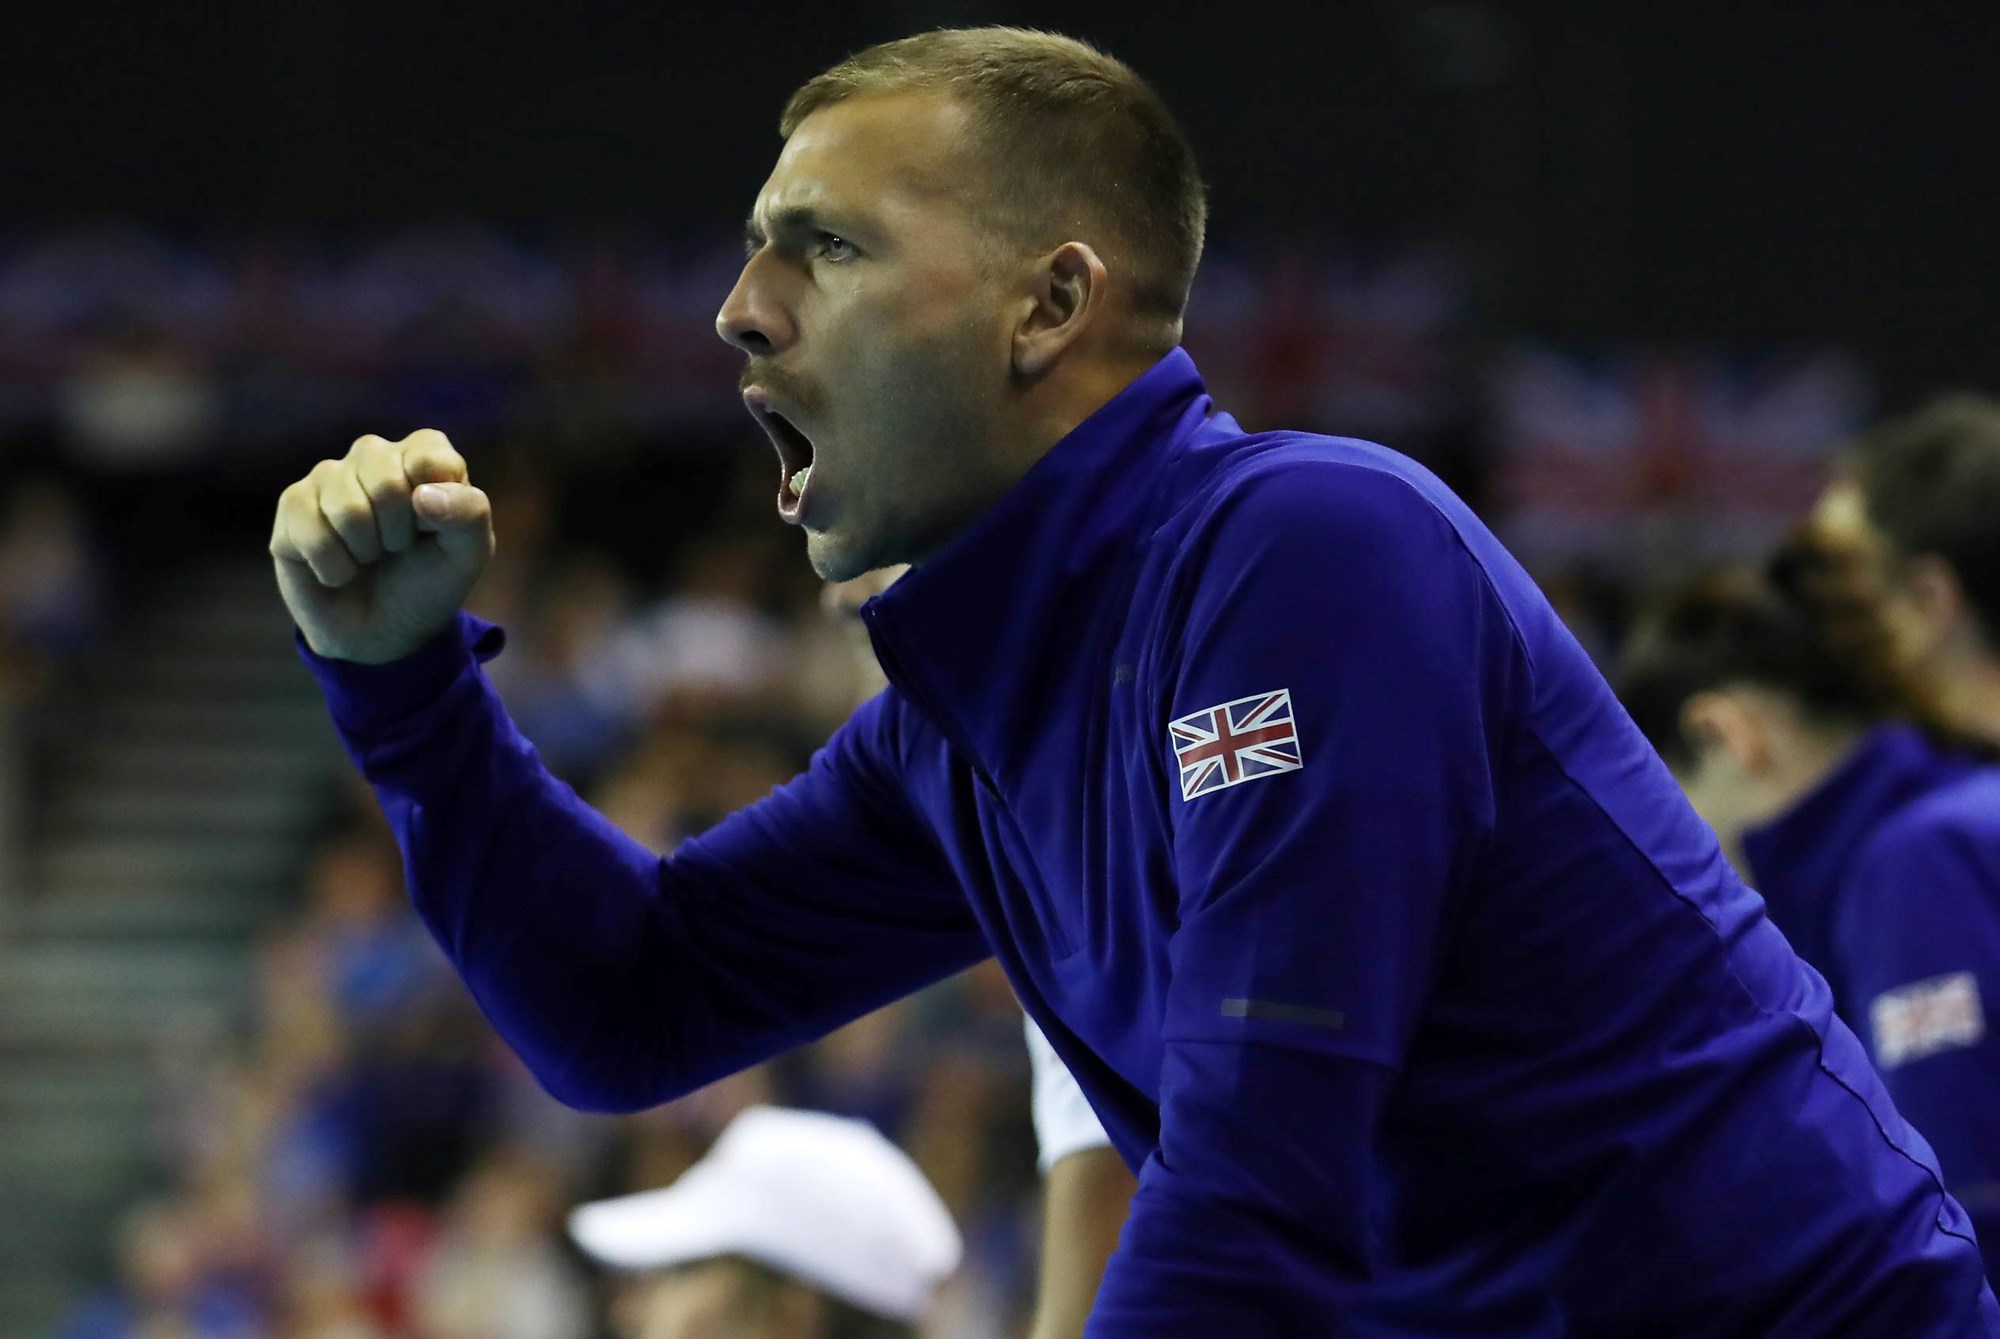 Dan Evans cheers on his teammates at the 2018 Davis Cup playoff in Glasgow